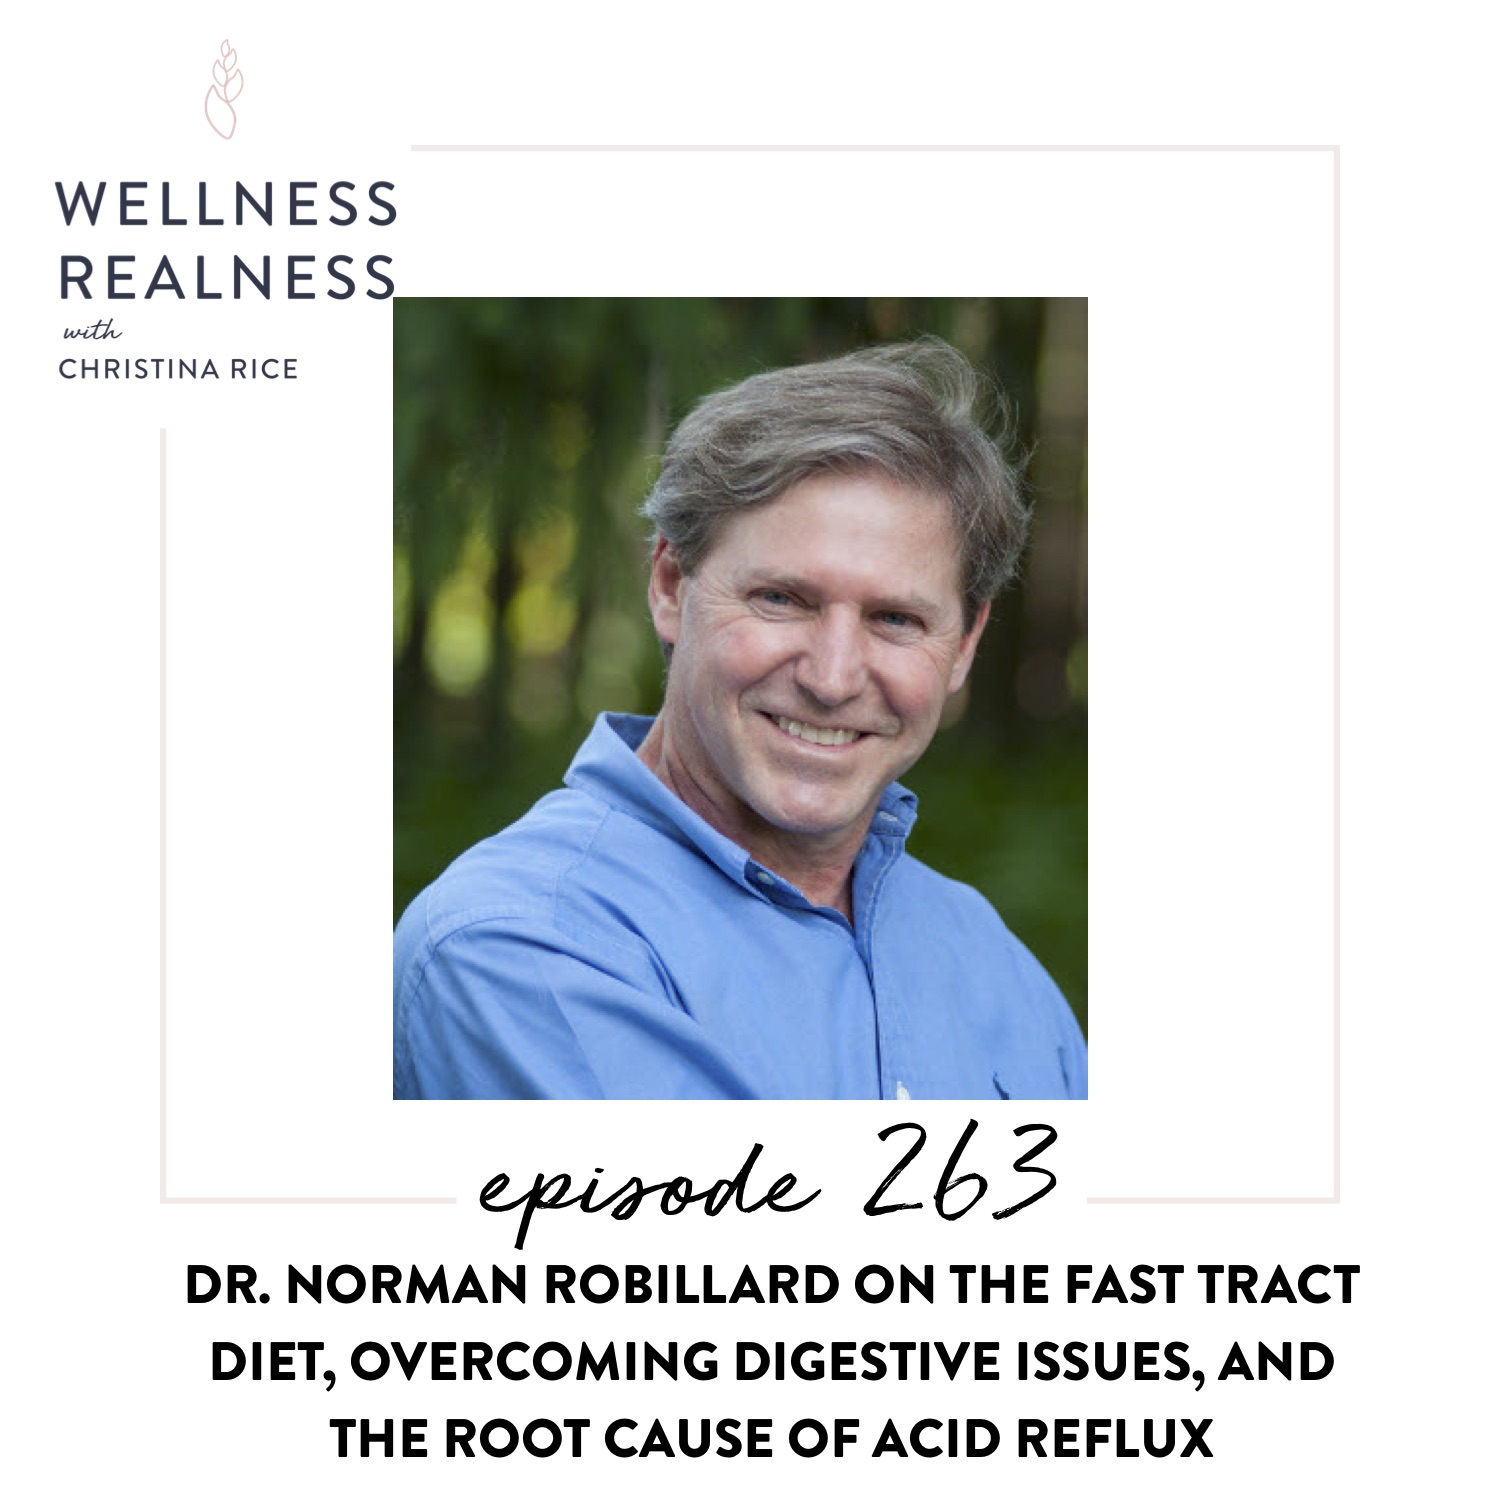 263: Dr. Norman Robillard on the Fast Tract Diet, Overcoming Digestive Issues, and the Root Cause of Acid Reflux